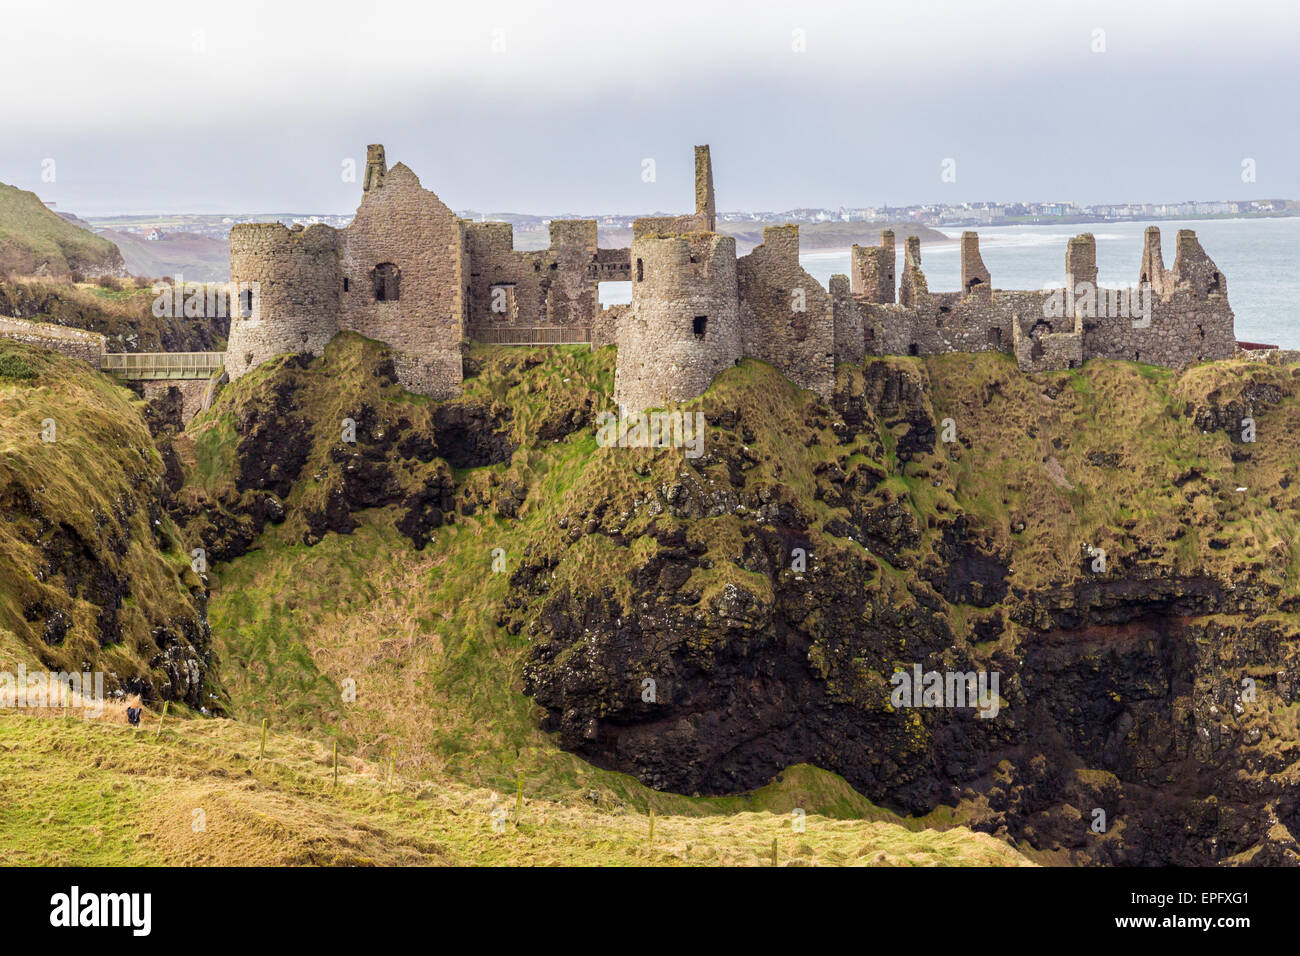 Dunluce castle ruins in Northern Ireland Stock Photo